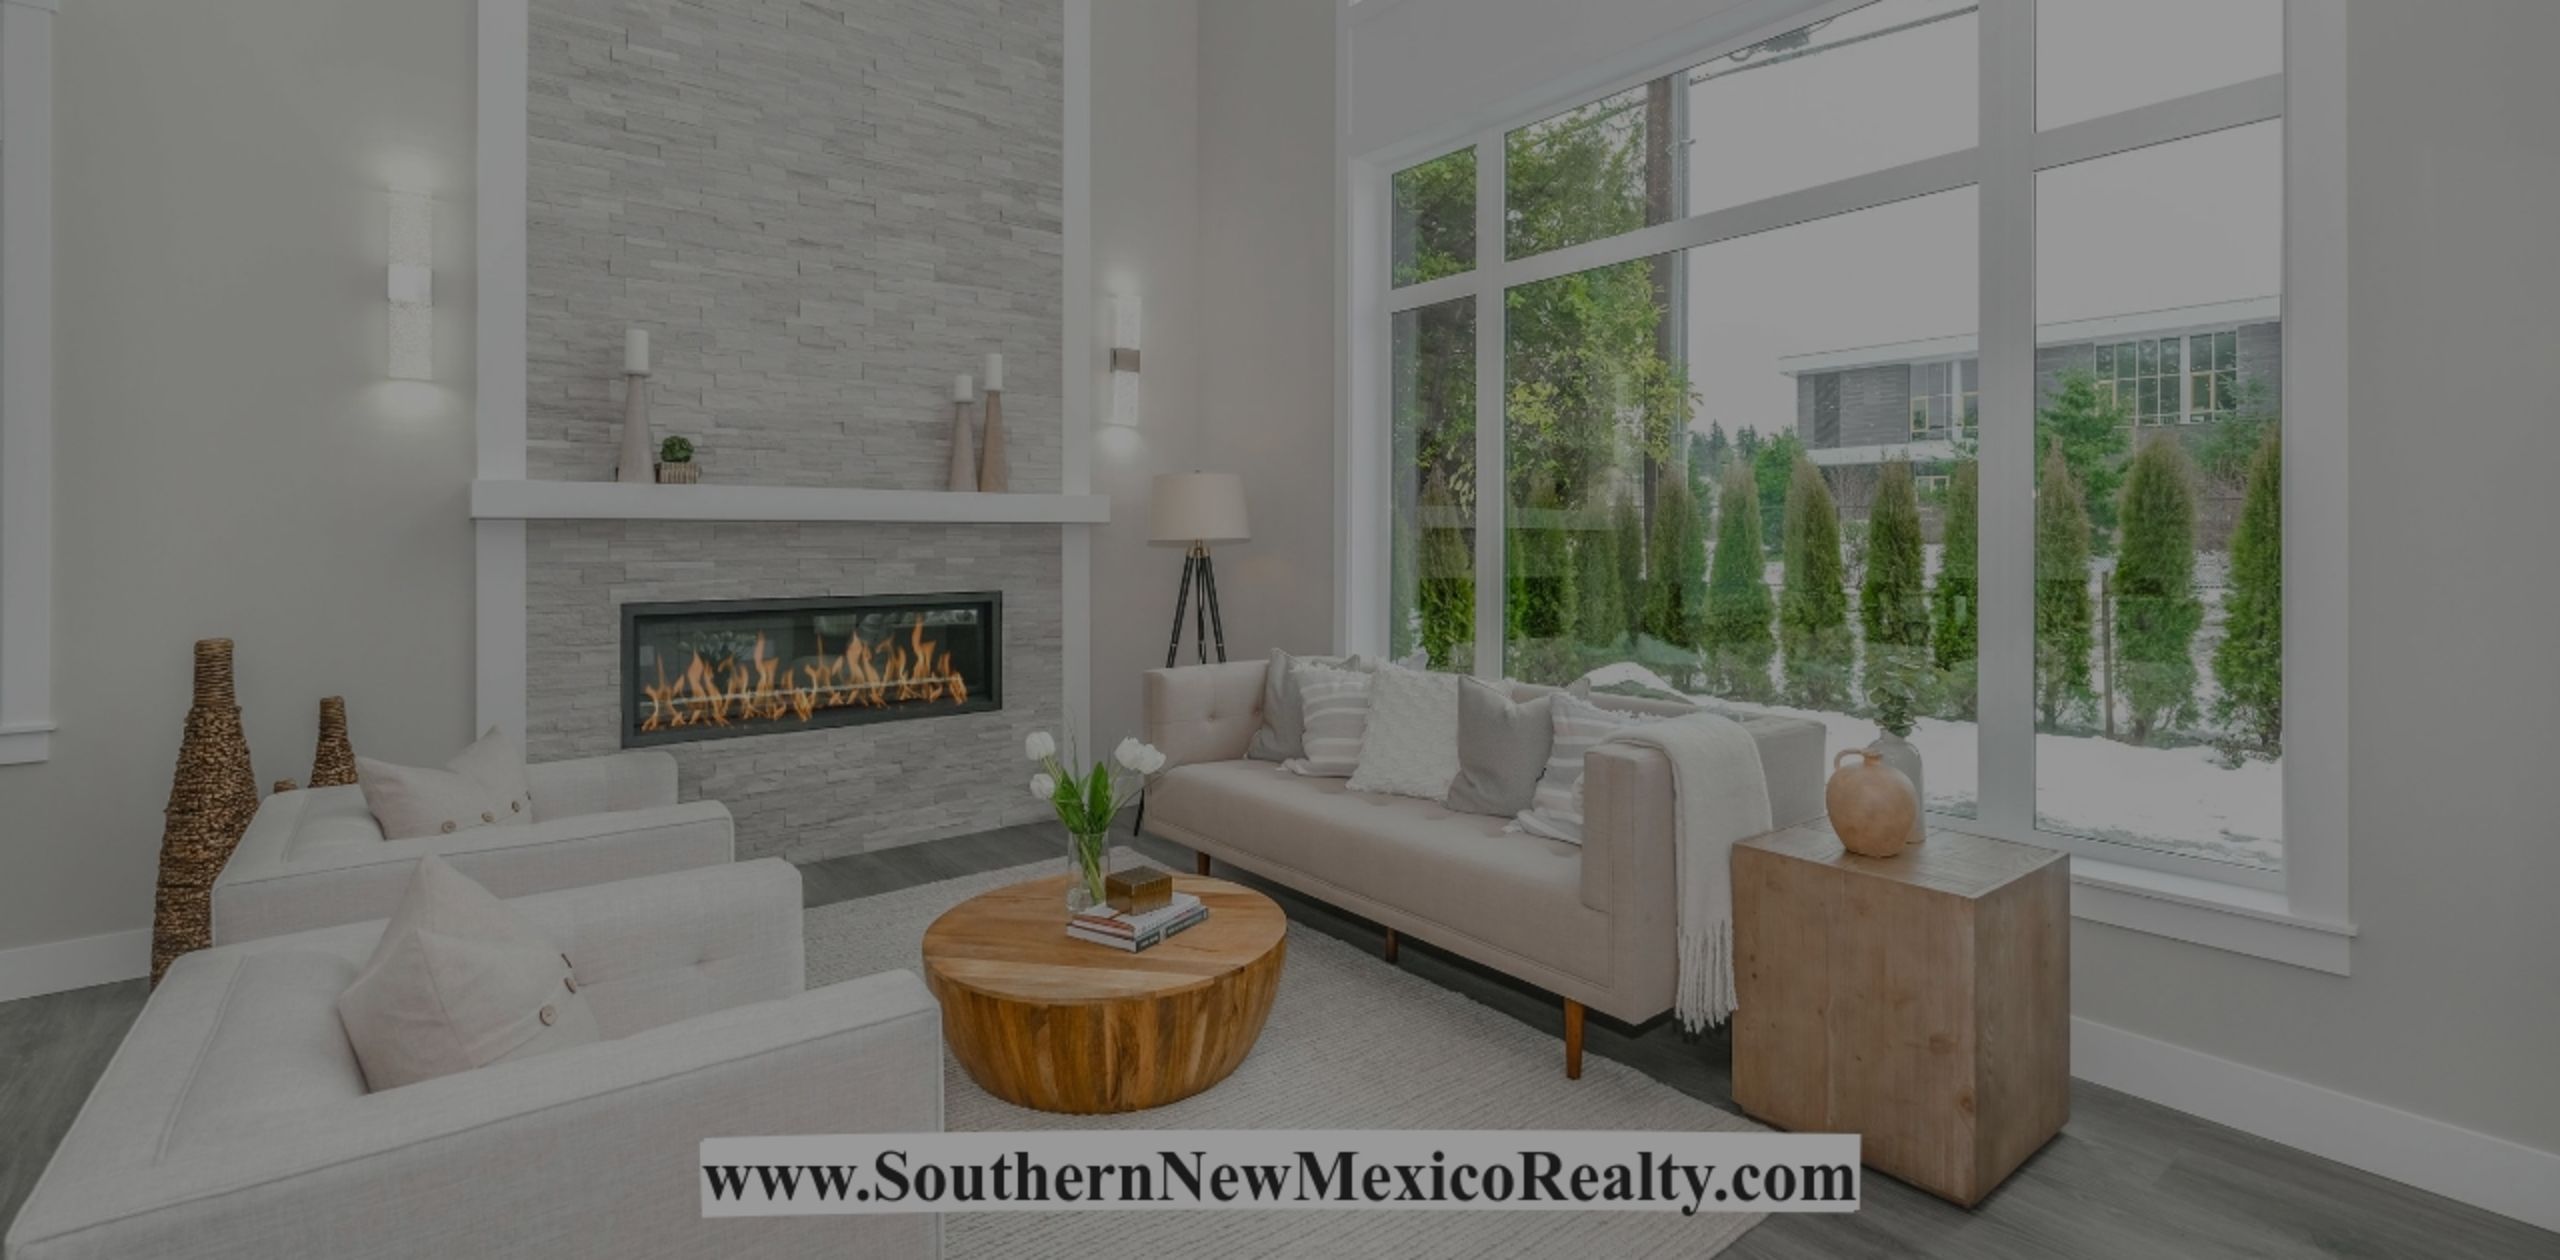 6 Tips To Prepare Your House To Sell In the Ruidoso, NM Area